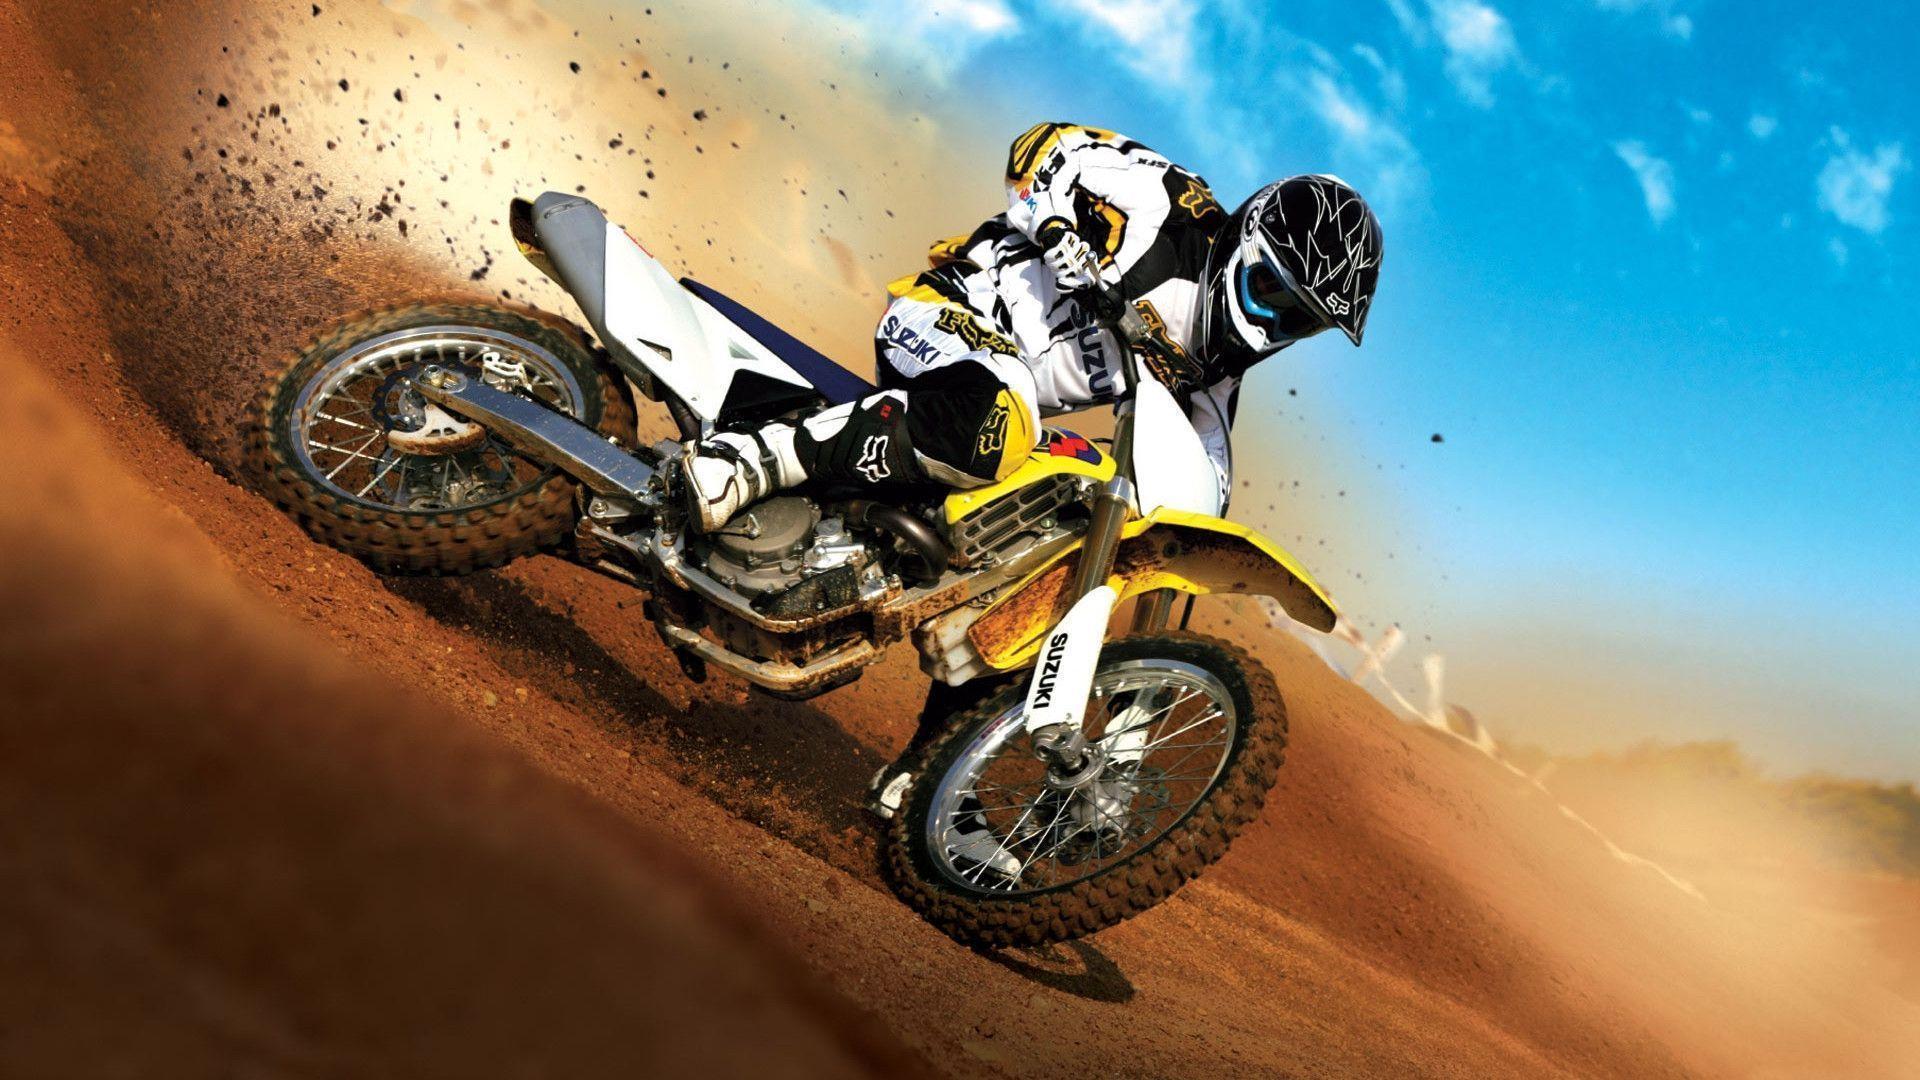 Yellow Motorcycle Action, iPhone Wallpaper, Facebook Cover